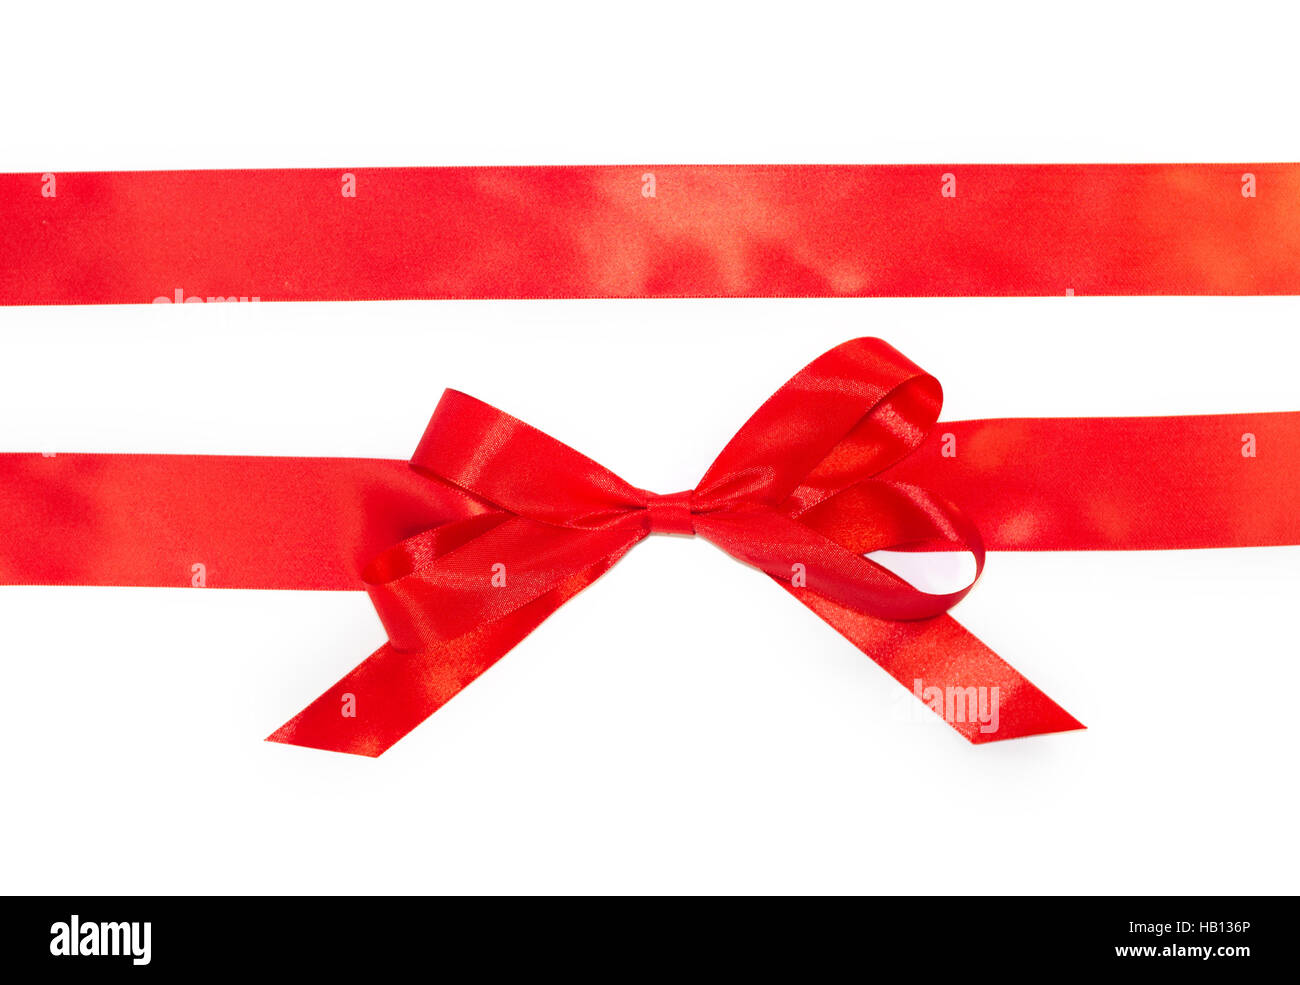 Thin red bow with crossed ribbon, isolated on white background Stock Photo  by ©zheeeka.gmail.com 93871246